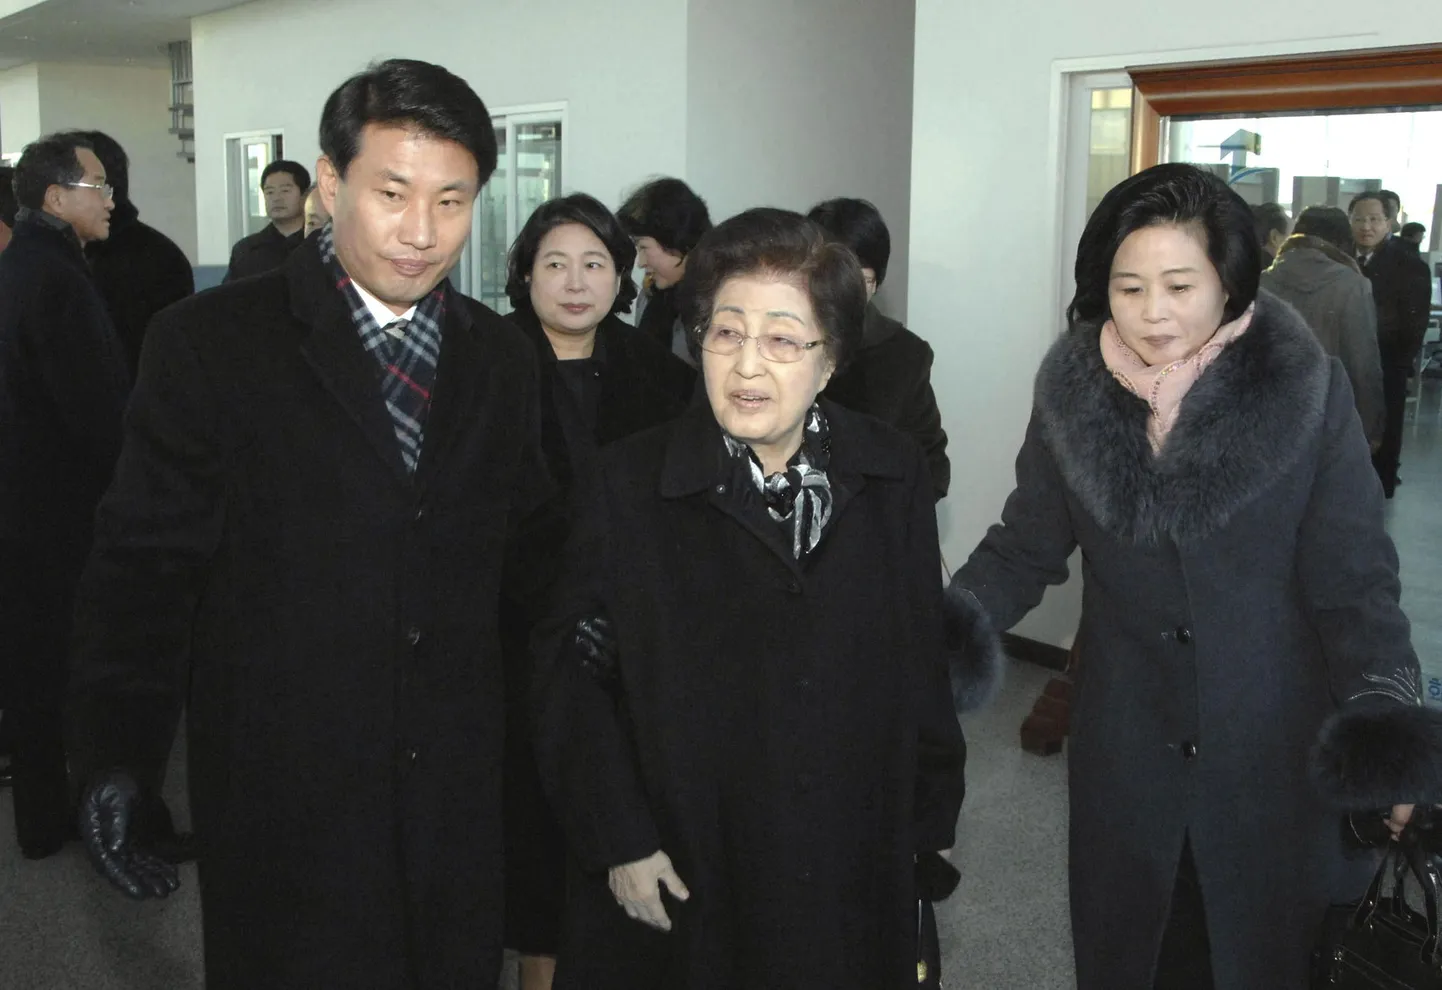 Former first lady Lee Hee-ho (C), widow of late South Korean President Kim Dae-jung and Hyundai Group chairwoman Hyun Jung-eun (2nd L, behind Lee) arrive in Pyongyang to pay their respects over North Korean leader Kim Jong-il's death December 26, 2011.   REUTERS/KCNA (NORTH KOREA - Tags: POLITICS OBITUARY) THIS IMAGE HAS BEEN SUPPLIED BY A THIRD PARTY. IT IS DISTRIBUTED, EXACTLY AS RECEIVED BY REUTERS, AS A SERVICE TO CLIENTS. NO THIRD PARTY SALES. NOT FOR USE BY REUTERS THIRD PARTY DISTRIBUTORS